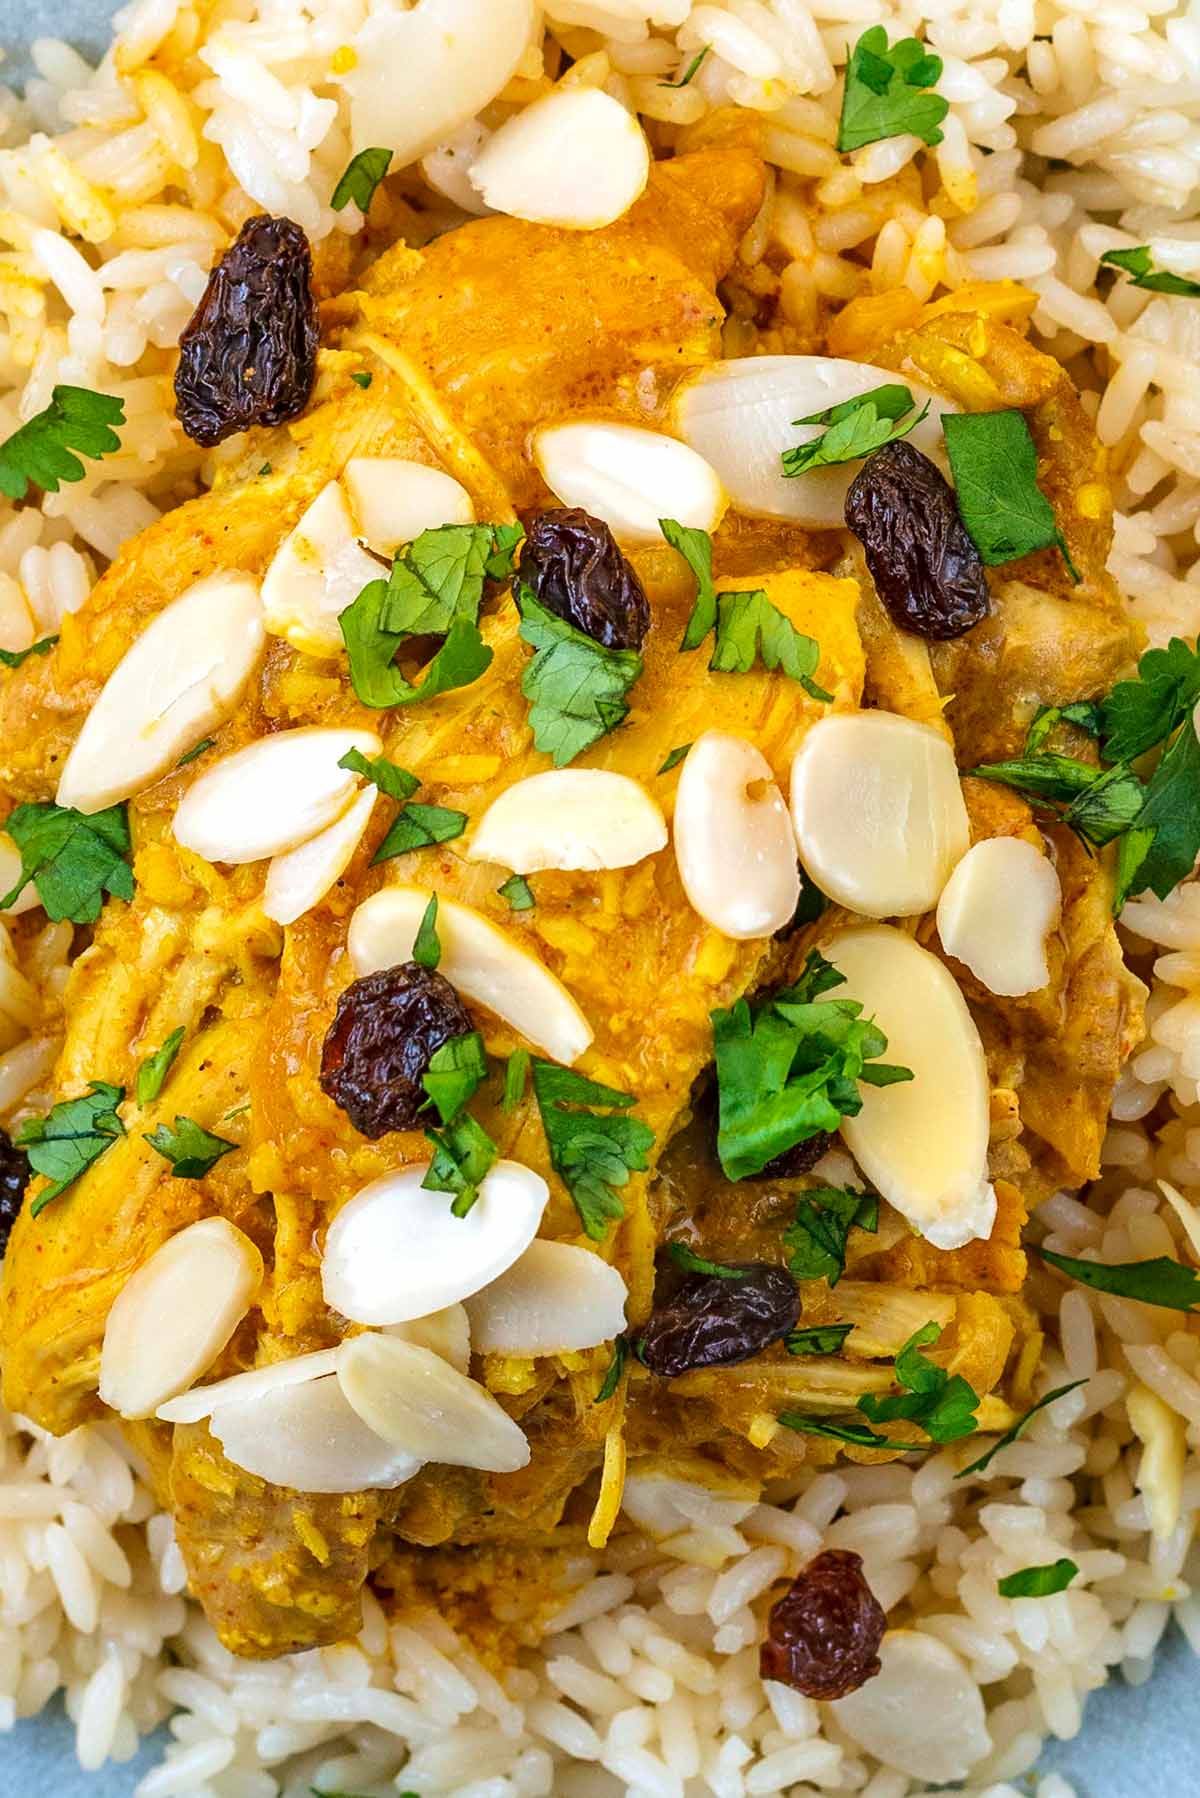 A chicken korma topped with flaked almonds and raisins.